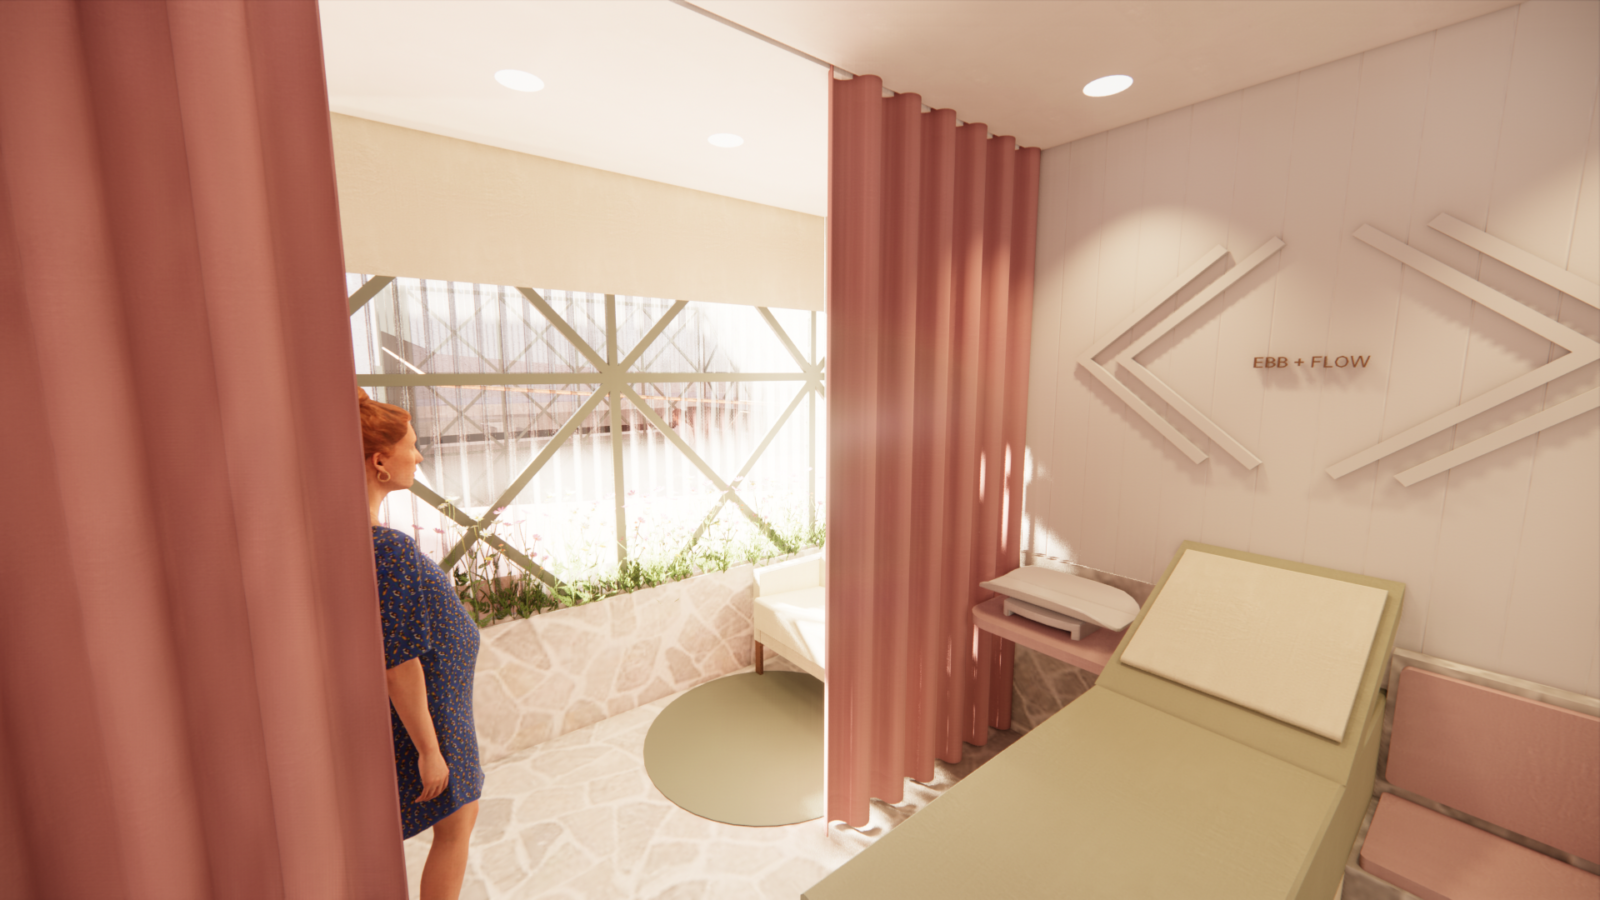 The delicate medical room is designed for an obstetrician and has deep pink retractable curtains. A pregnant mother walks towards the consultation bed which is olive green. The atrium screening allows natural light to cast through the window.